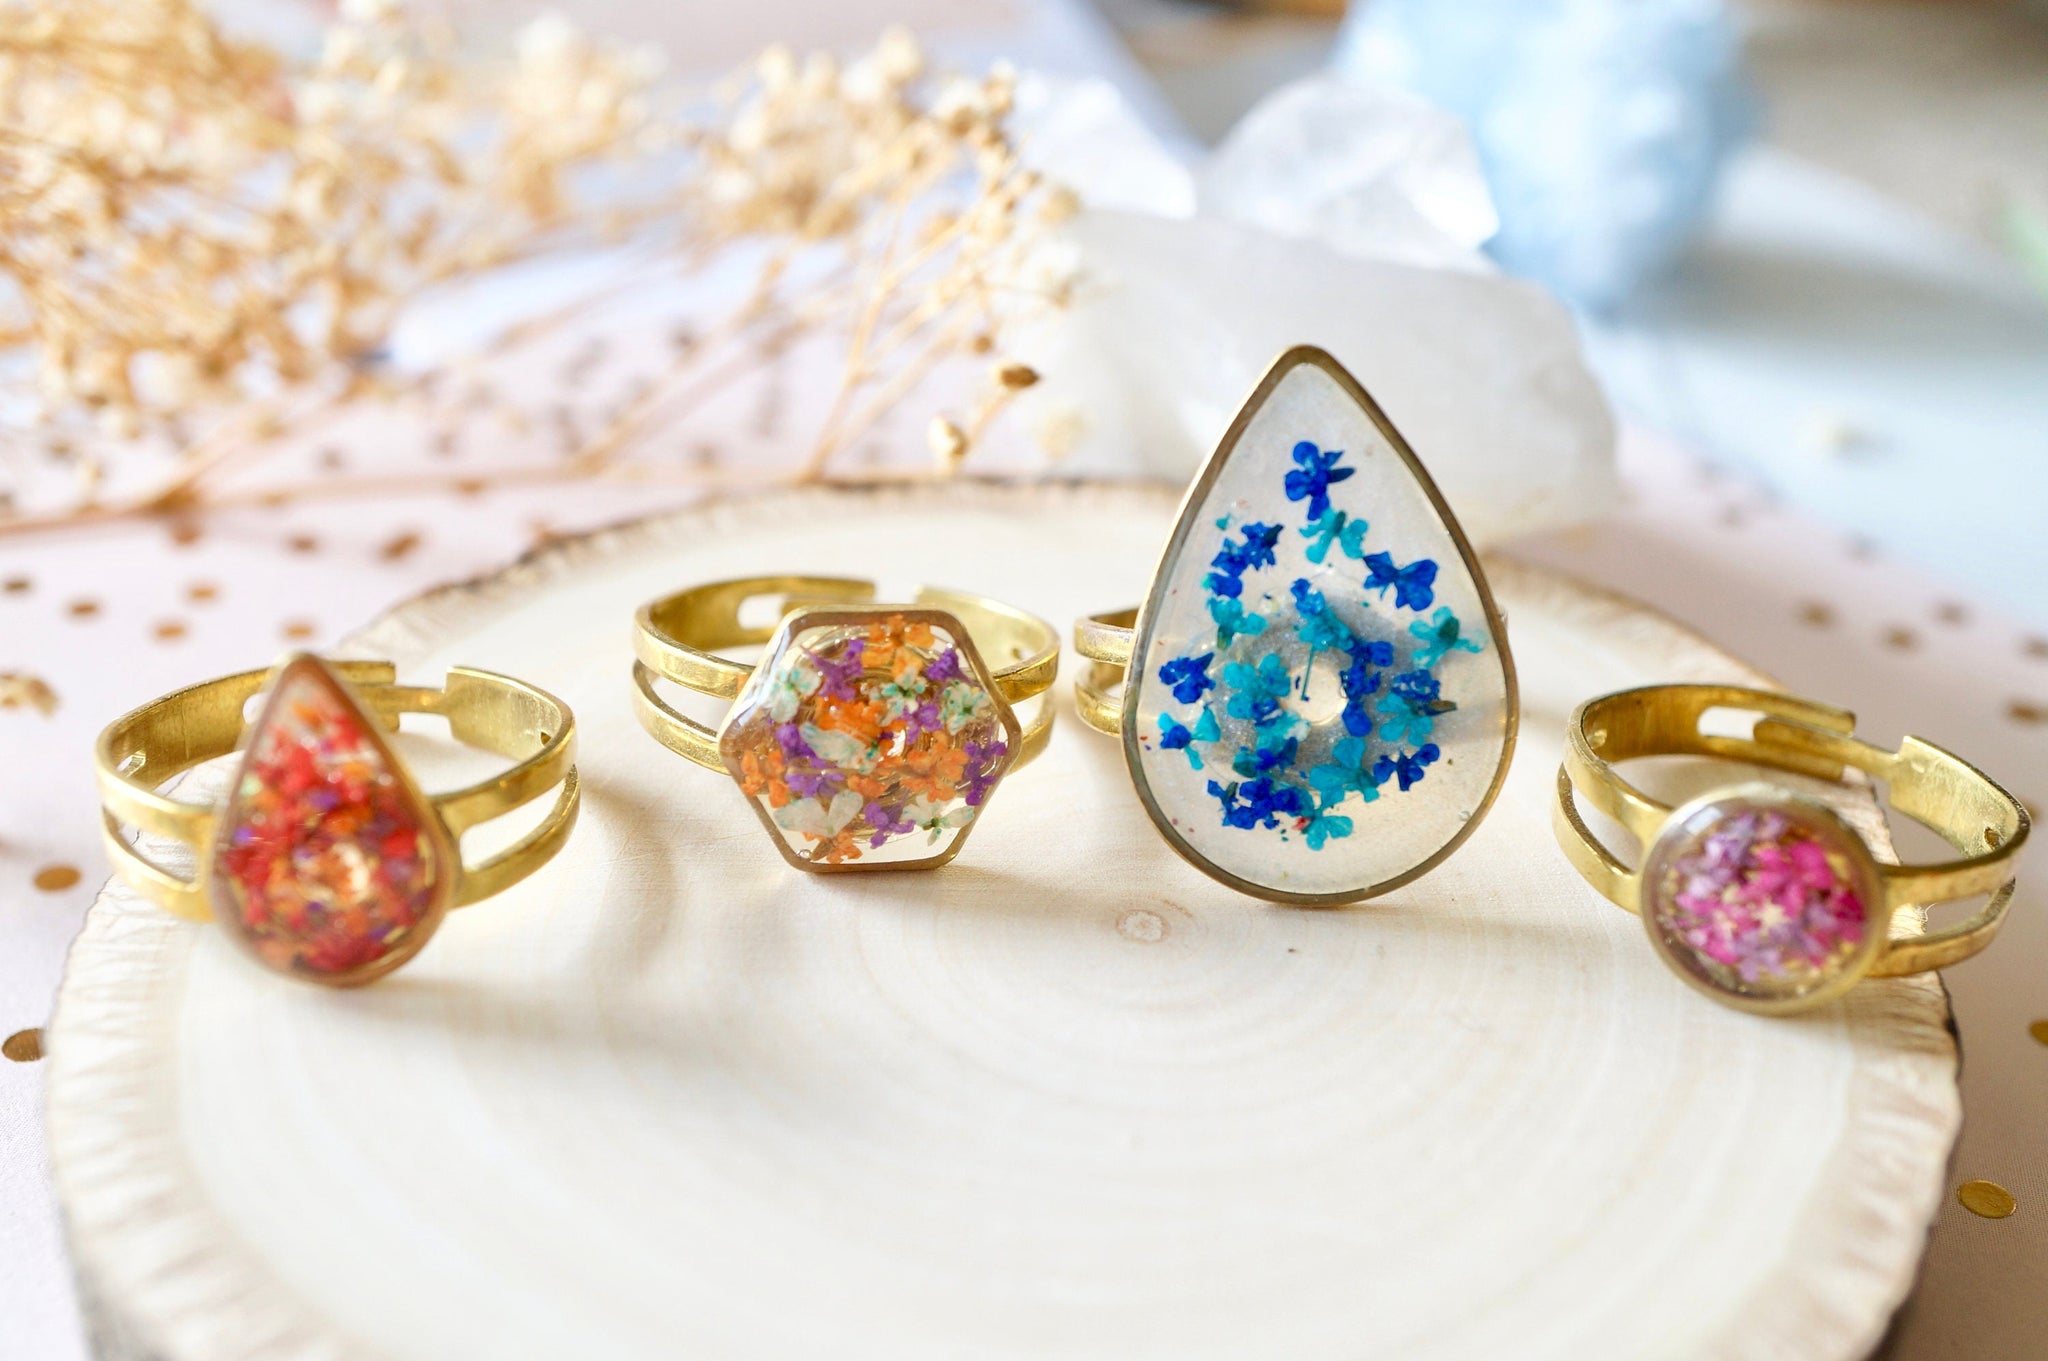 My Secret Wood's Out of this World Resin and Wood Rings / The Beading Gem